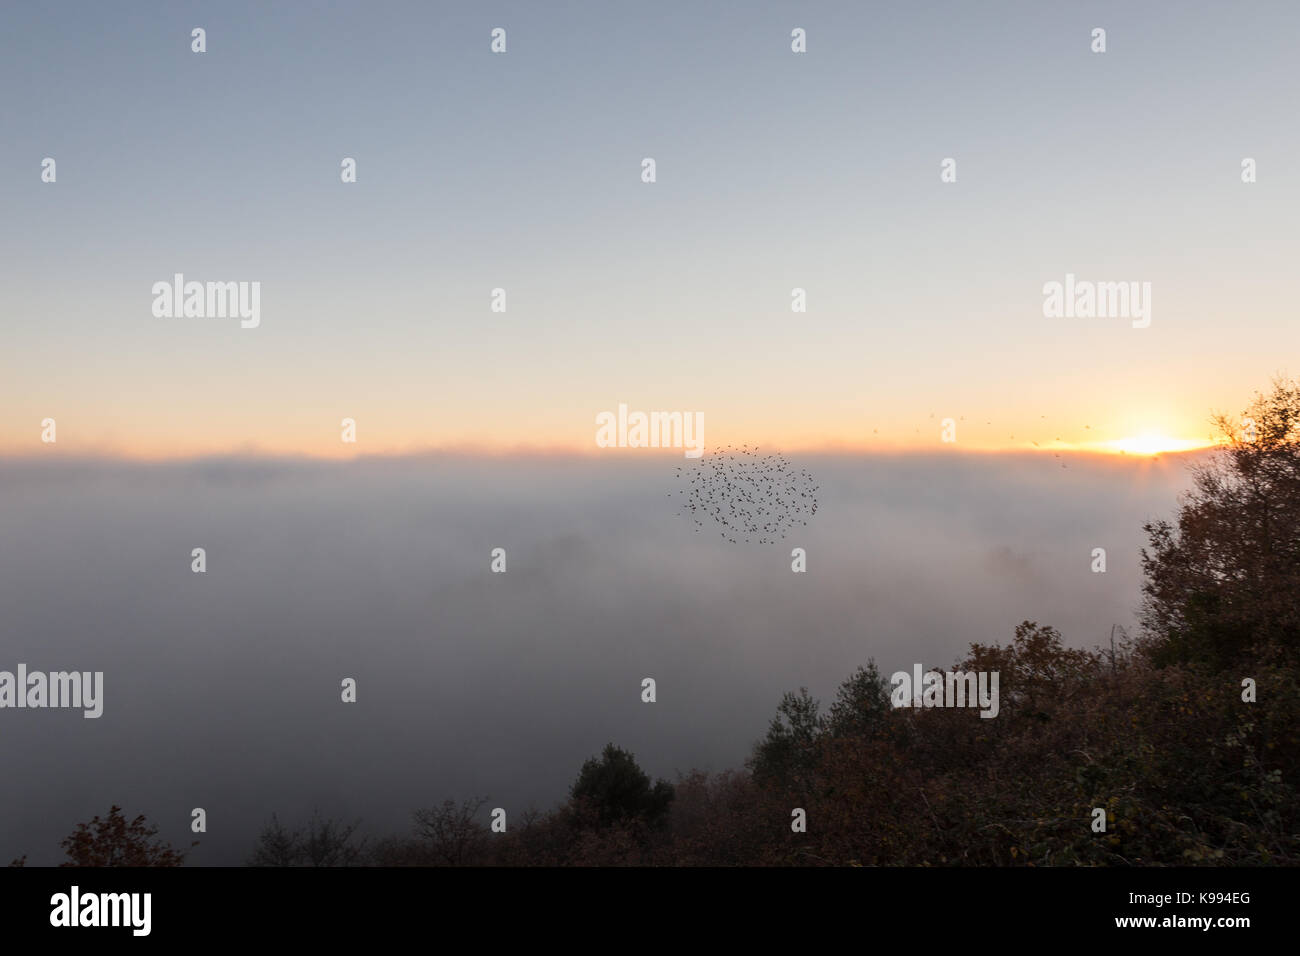 A sea of fog filling a valley at sunset, with a flock of birds flying by Stock Photo